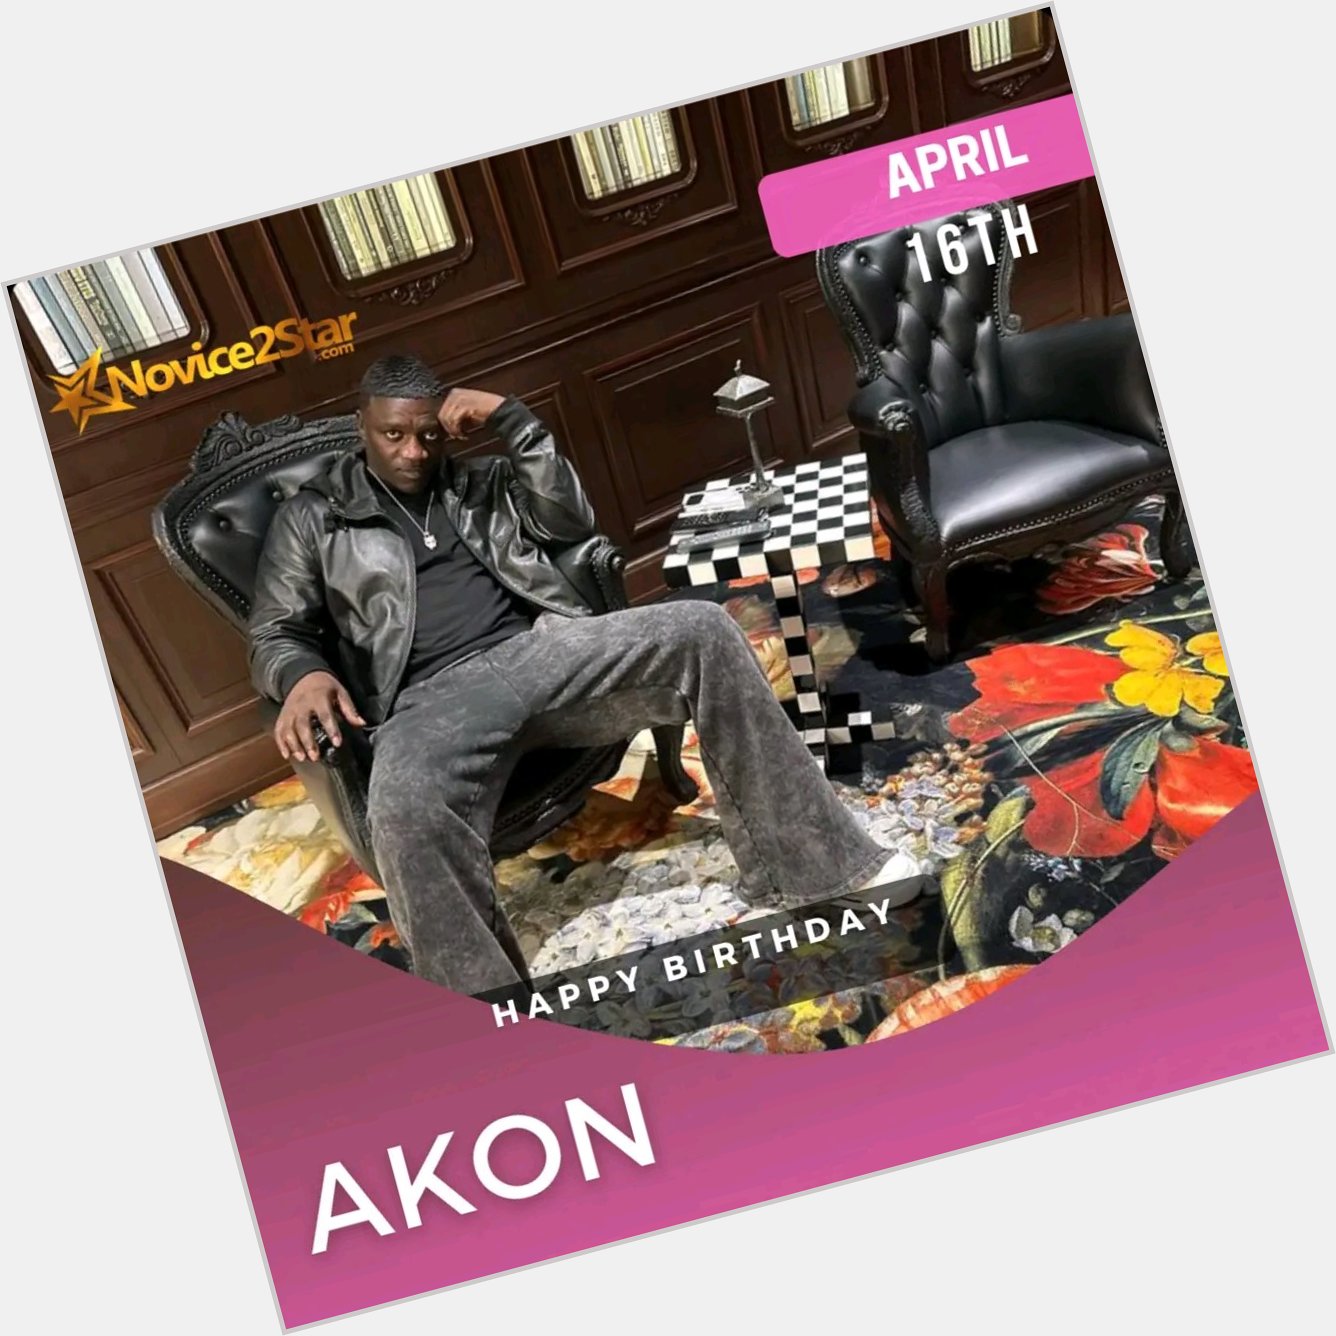 One of my Africa best, Akon clock 50 today... Drop your best song of Akon
Happy birthday 